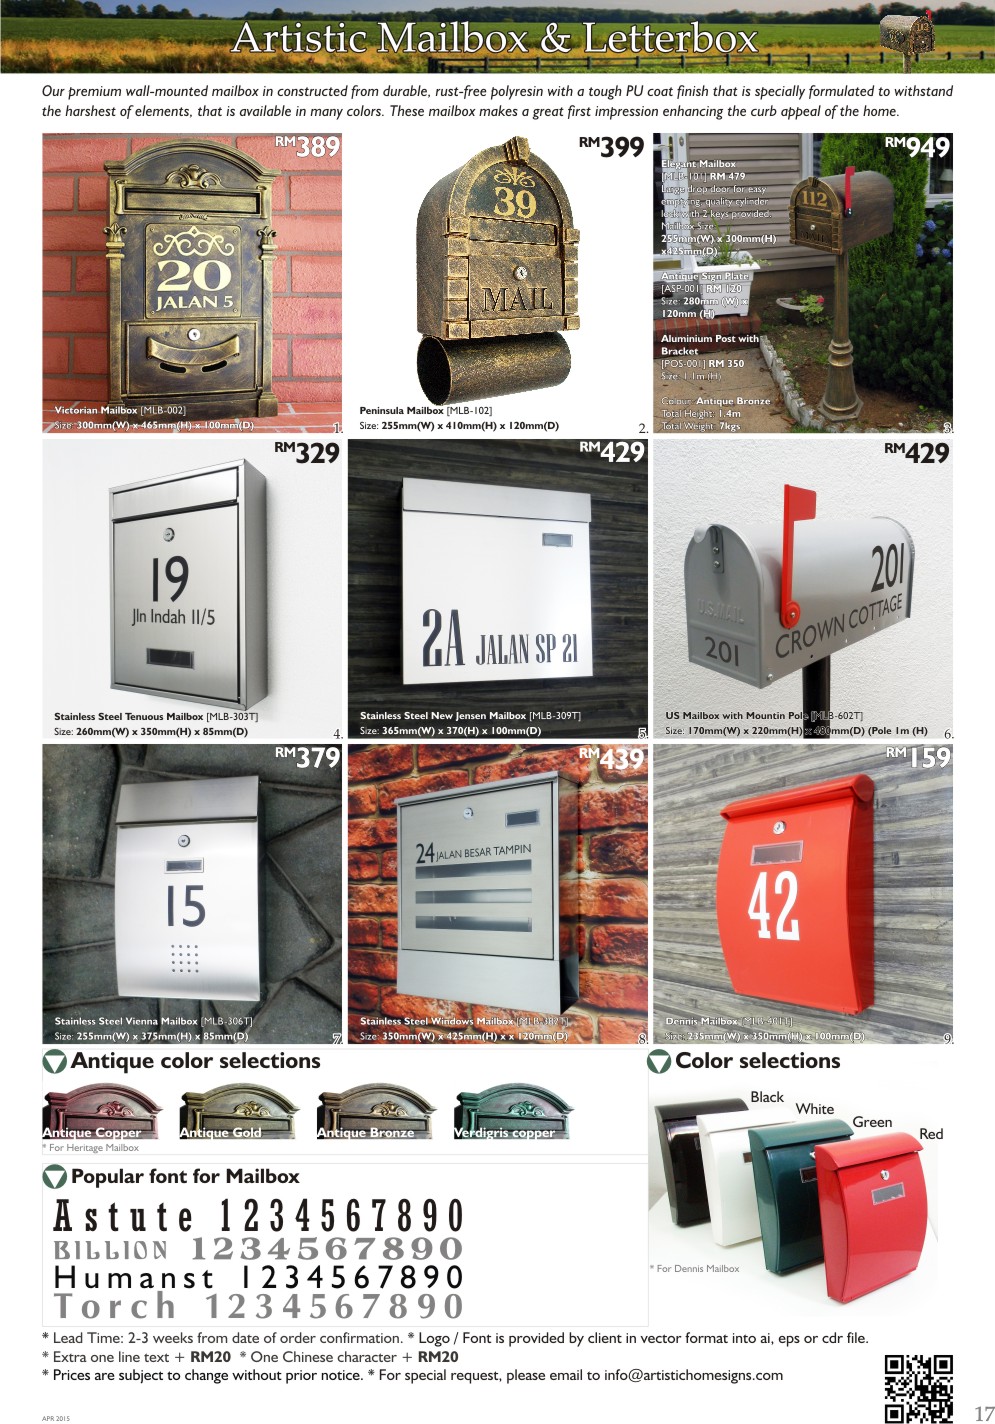 2015 Heritage Mailboxes New Stainless Steel Letterbox